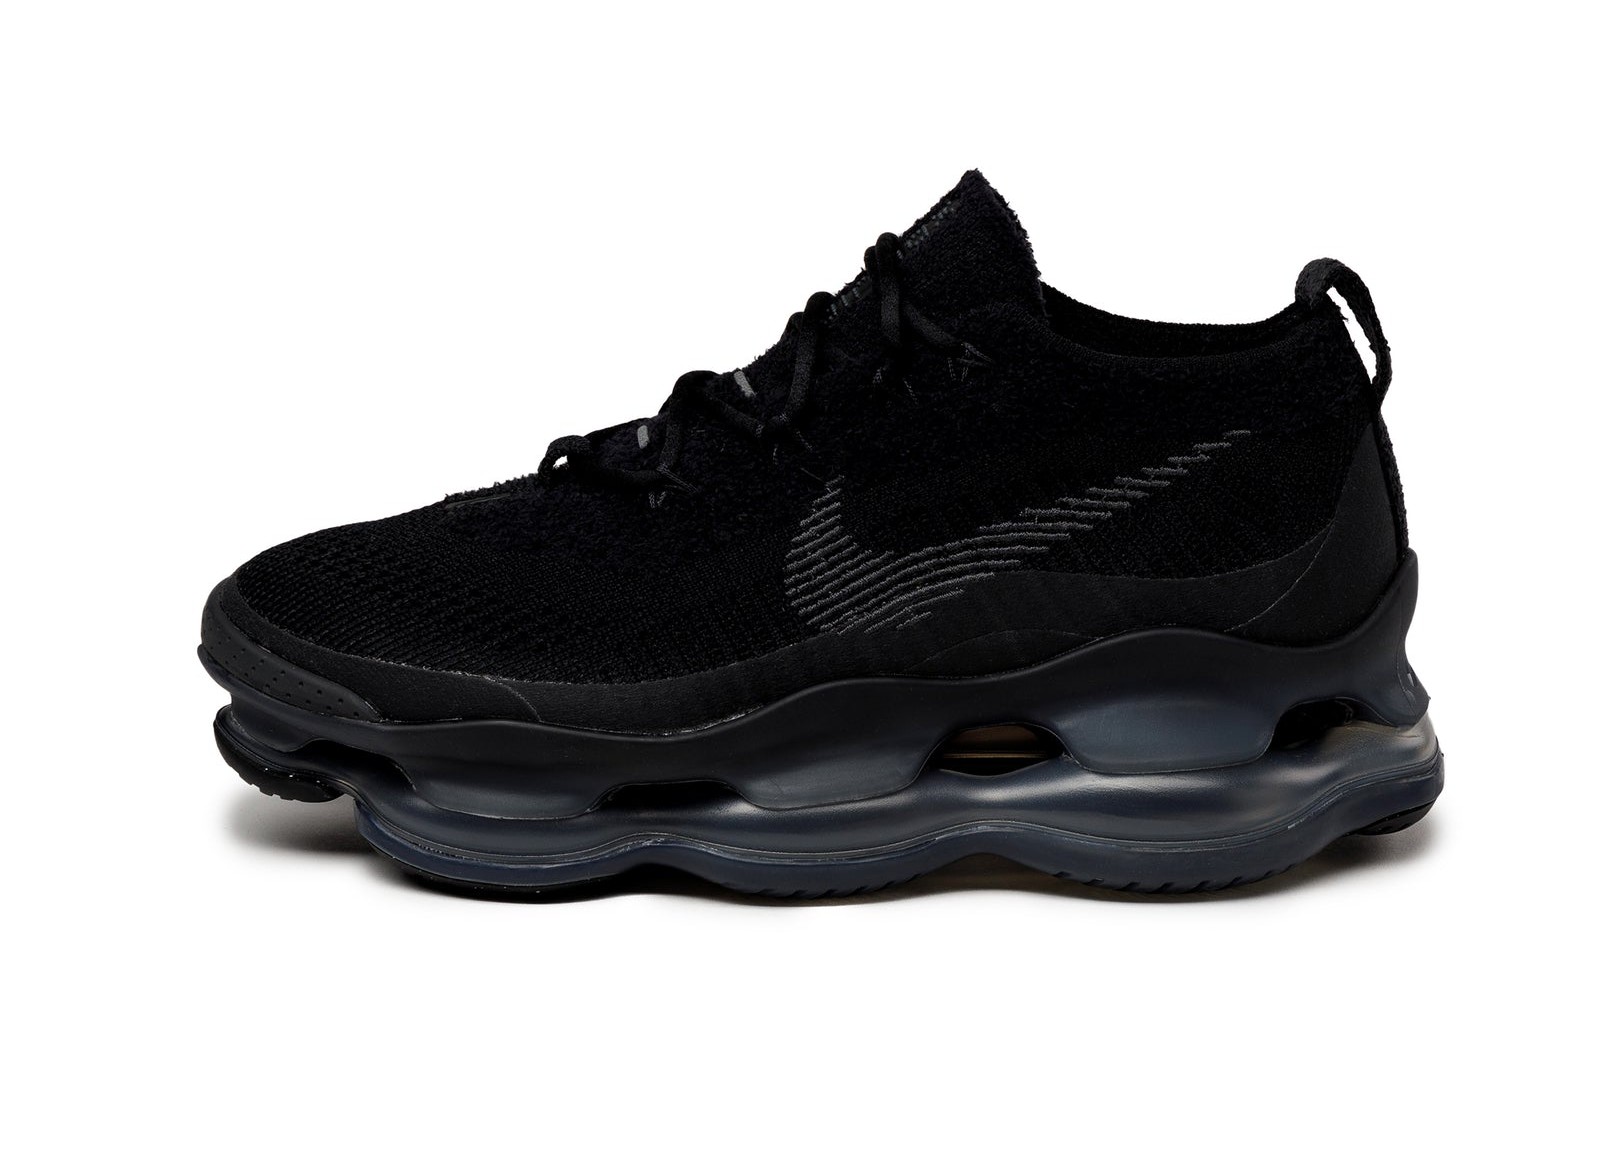 Nike Air Max Scorpion Flyknit
Black / Anthracite